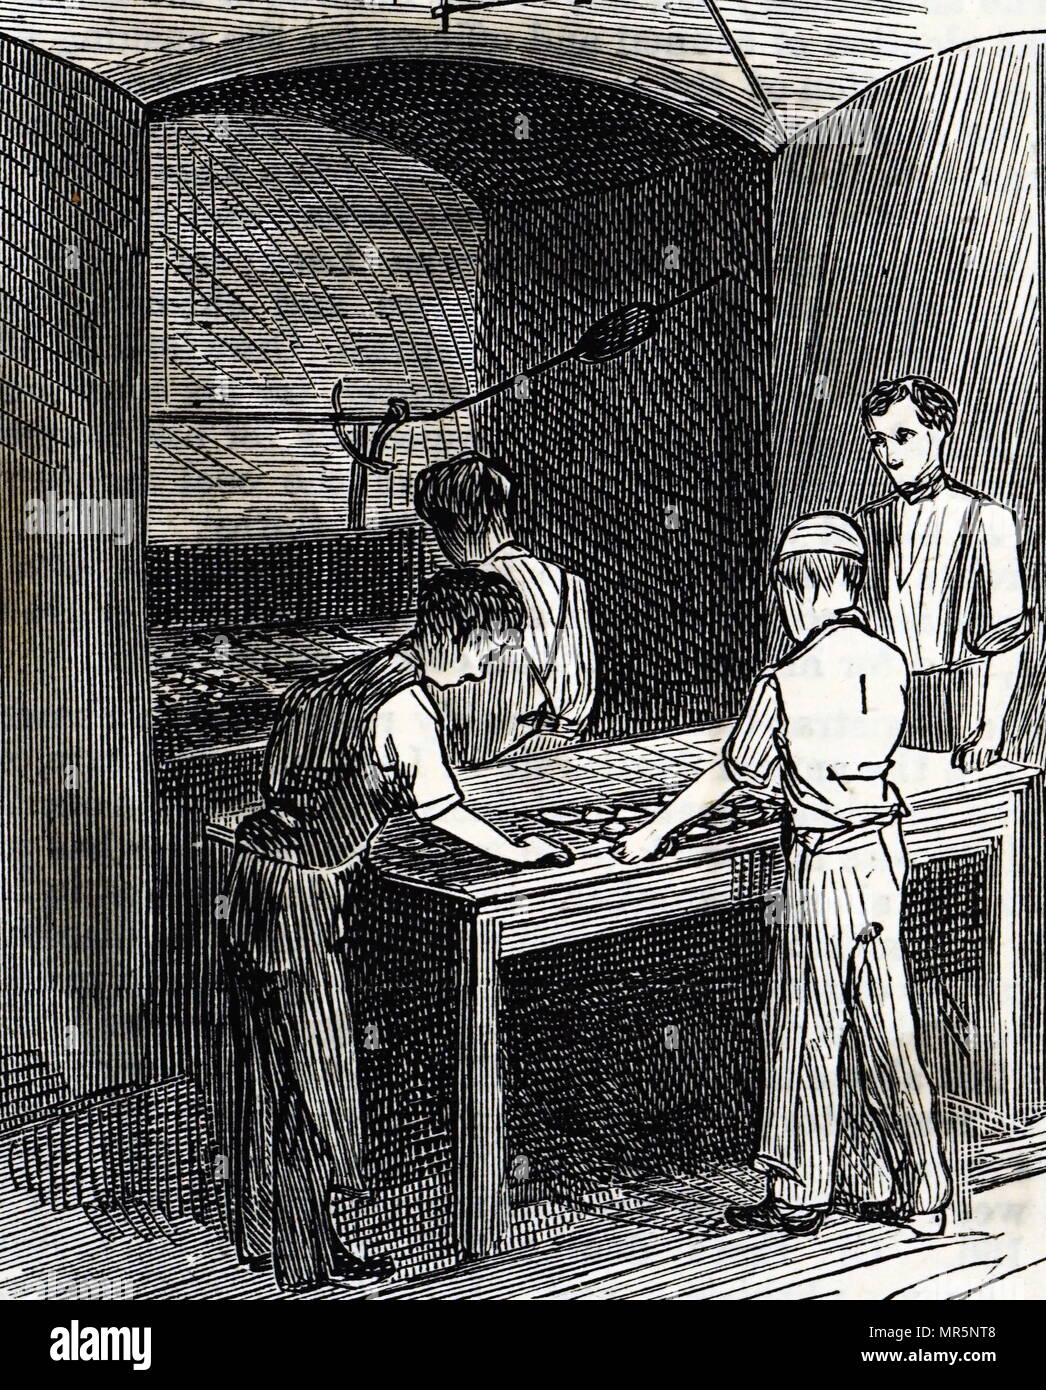 Engraving depicting biscuits being put into the oven at the Peek Frean & Co.'s biscuit factory. Dated 19th century Stock Photo